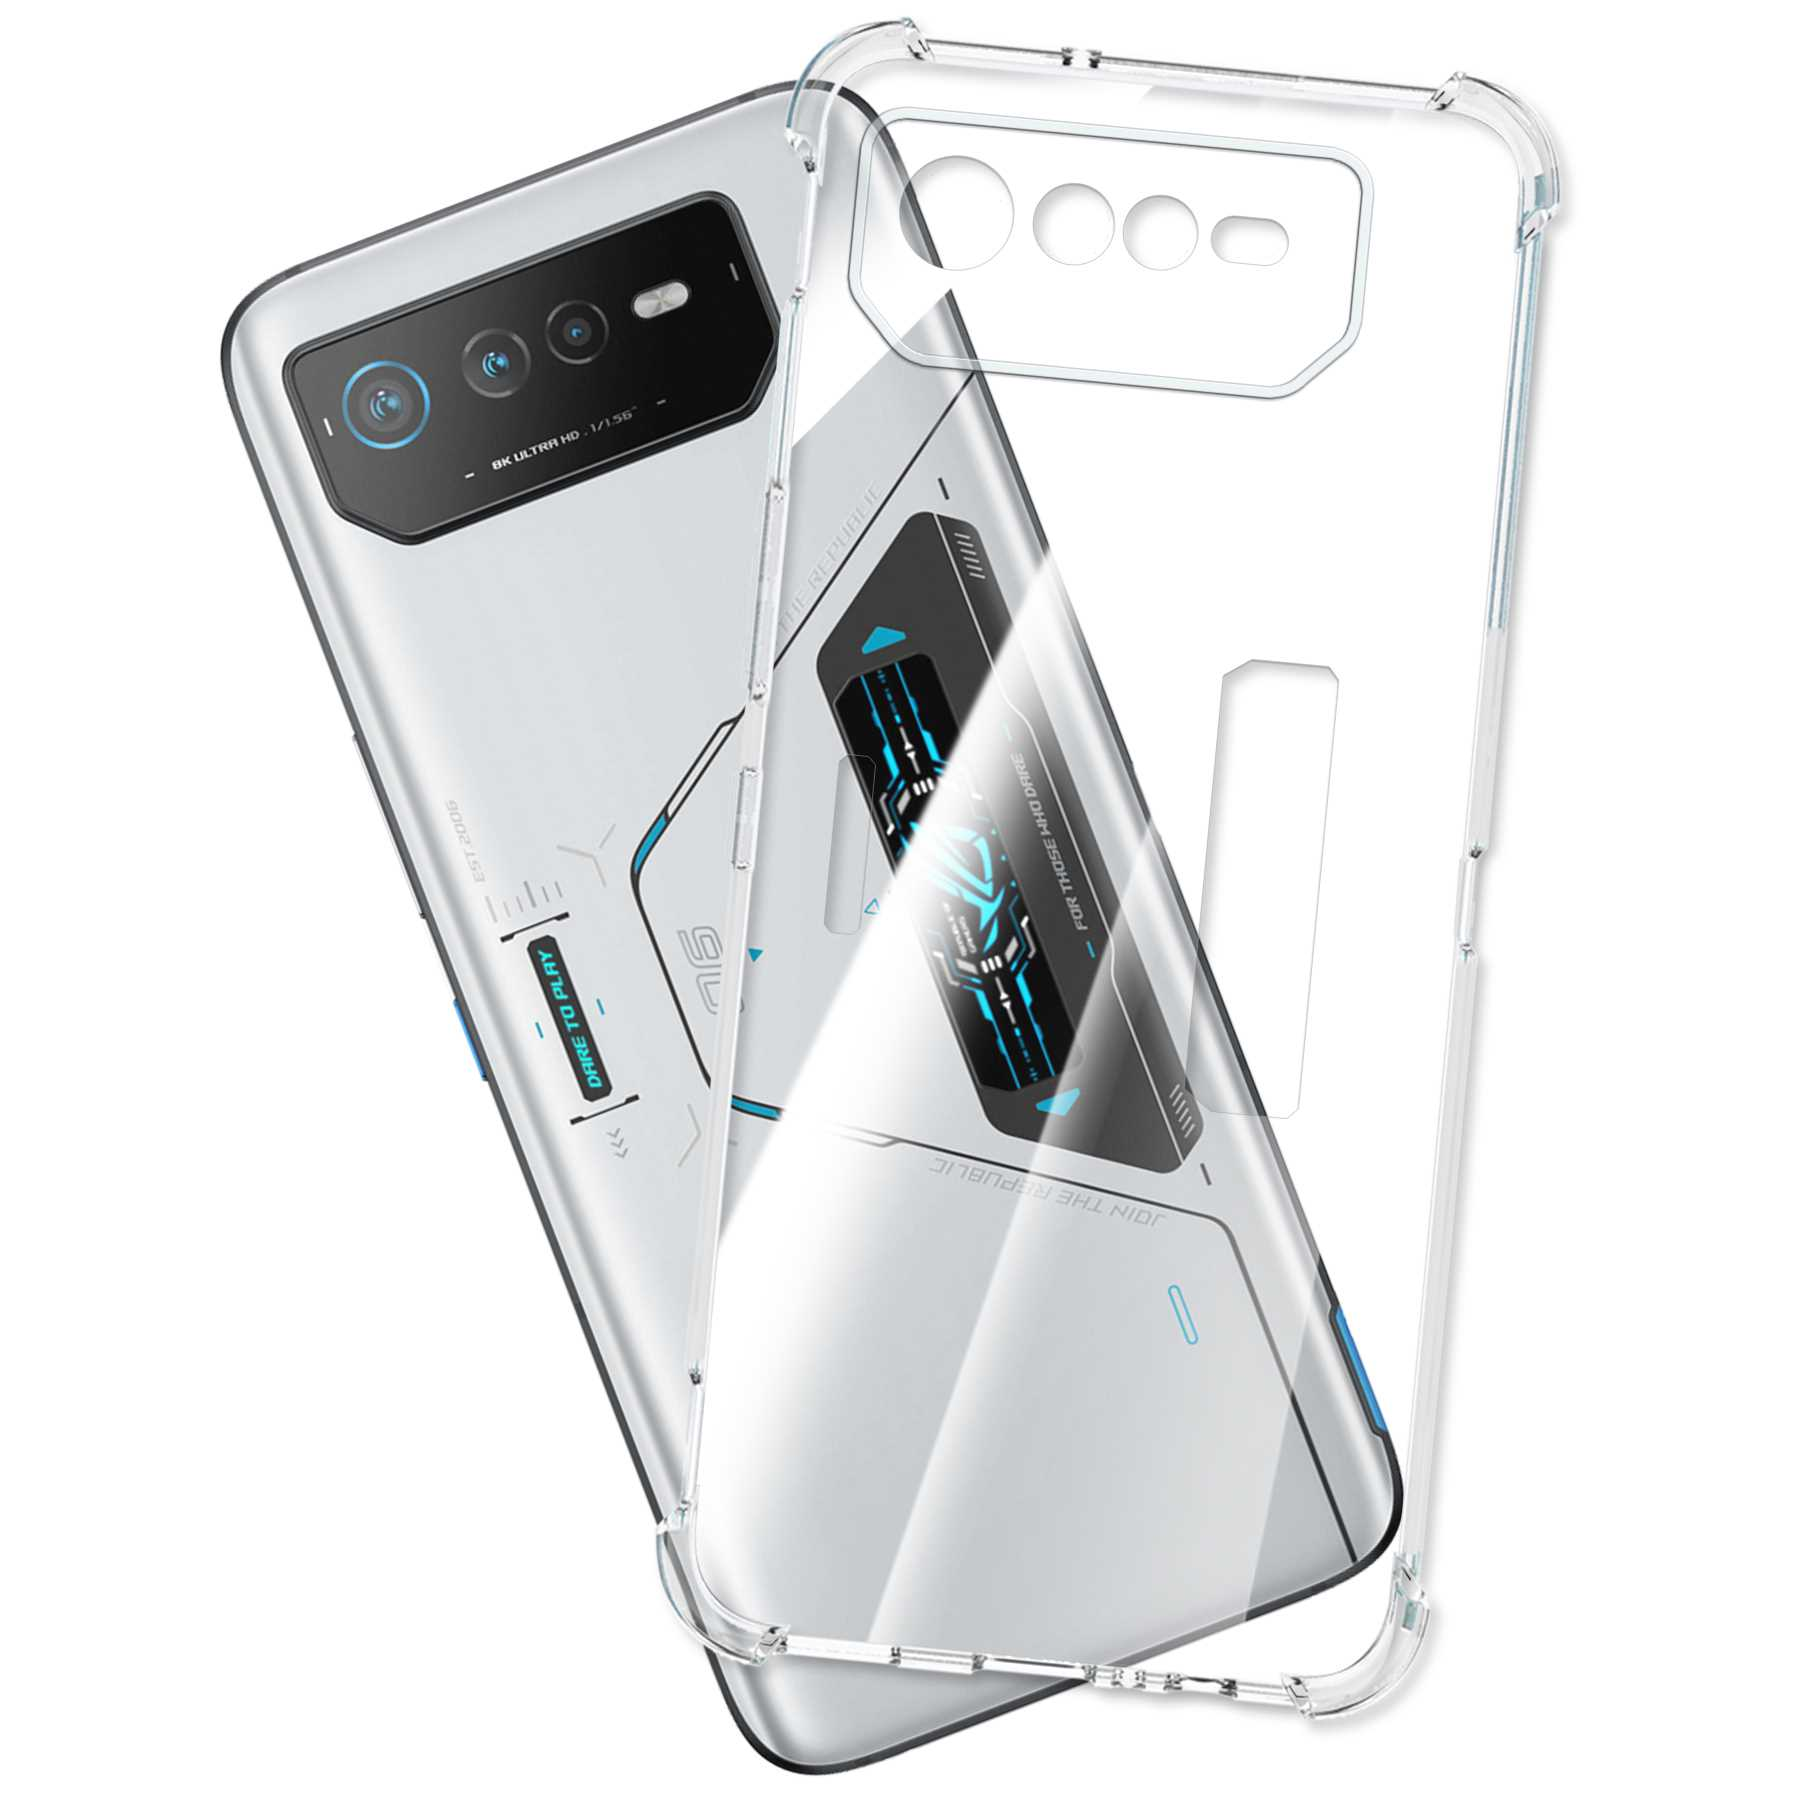 ENERGY Backcover, MTB MORE Asus, Case, 6D Phone 6 Clear Ultimate, Pro, Transparent Armor ROG